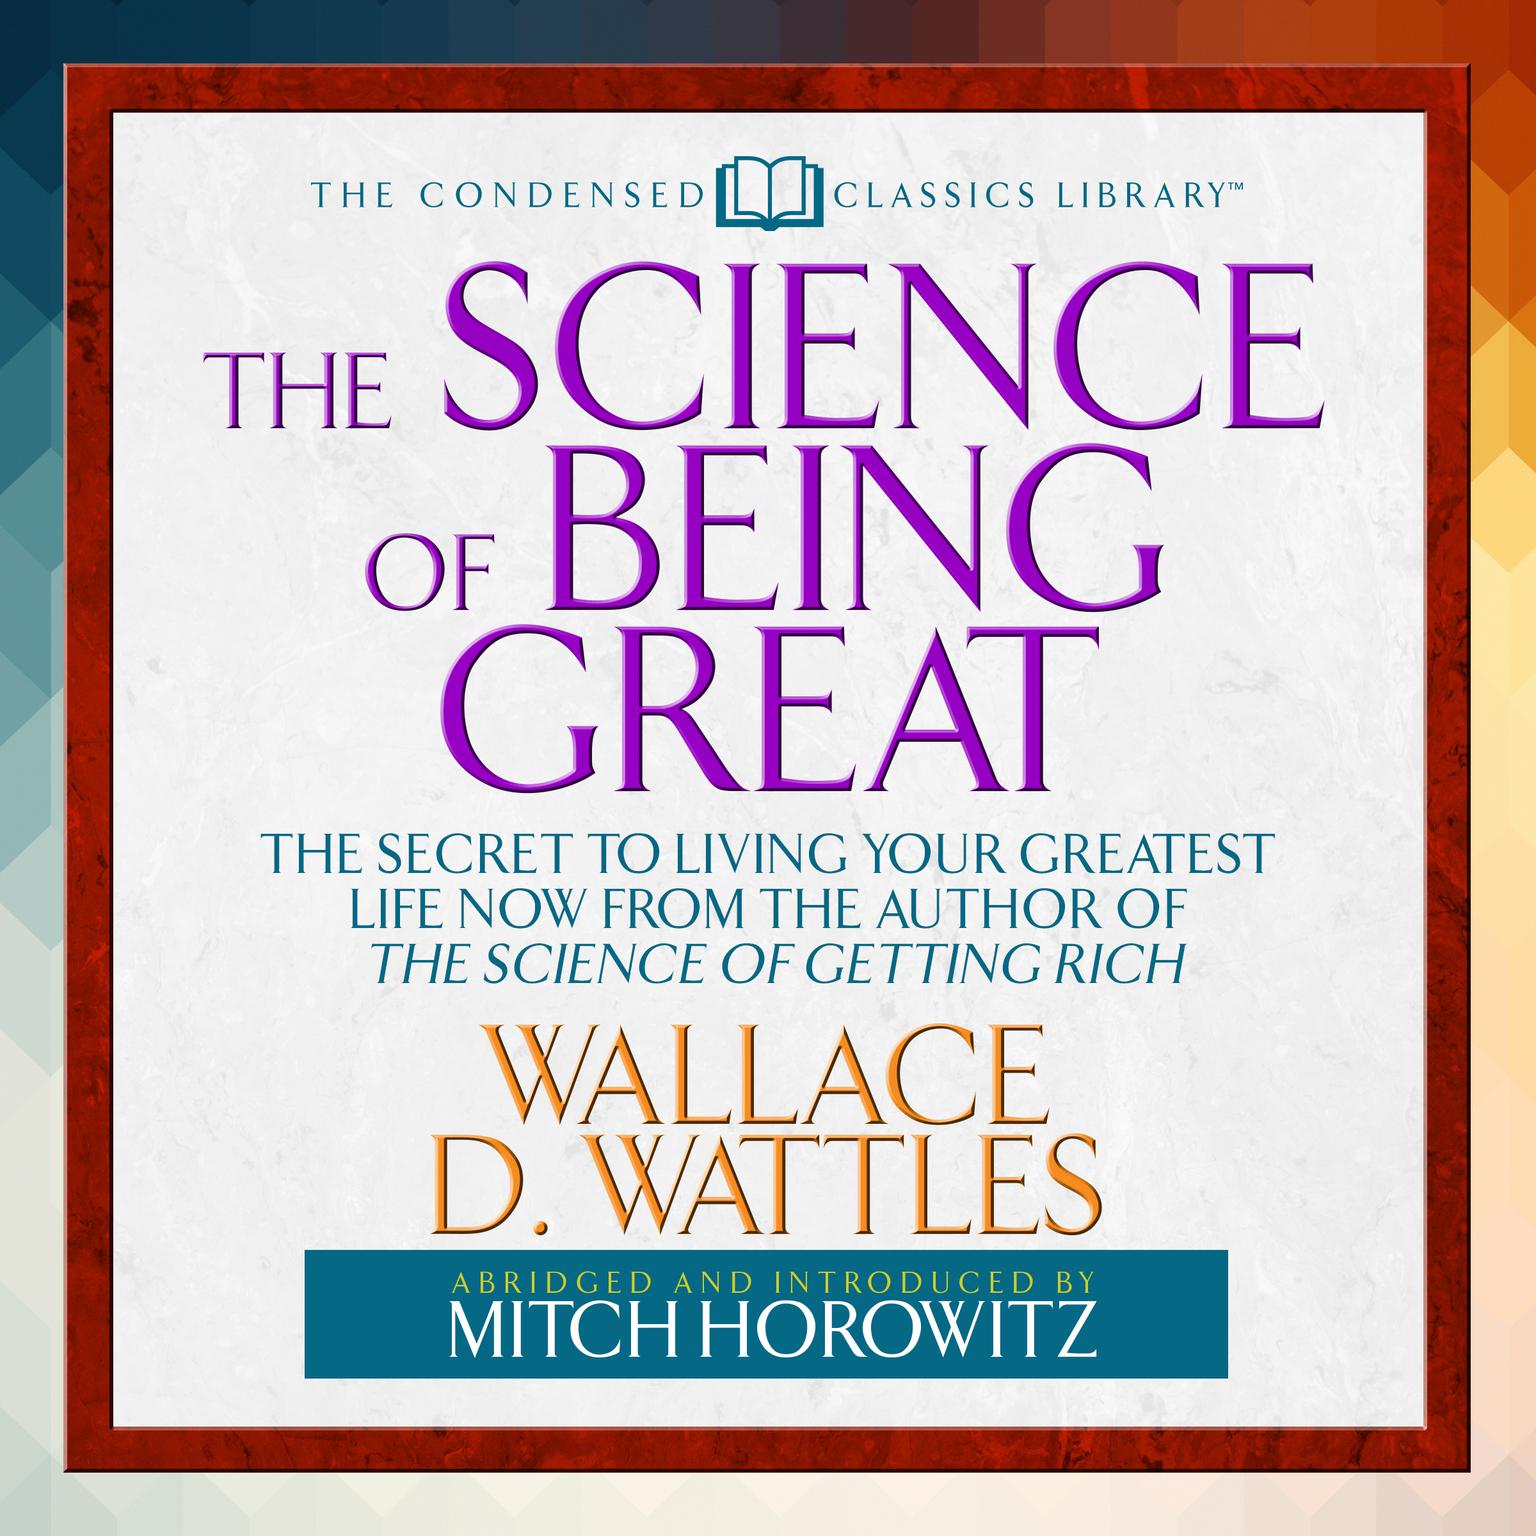 The Science of Being Great (Abridged): The Secret to Living Your Greatest Life Now from the Author of The Science of Getting Rich Audiobook, by Wallace D. Wattles